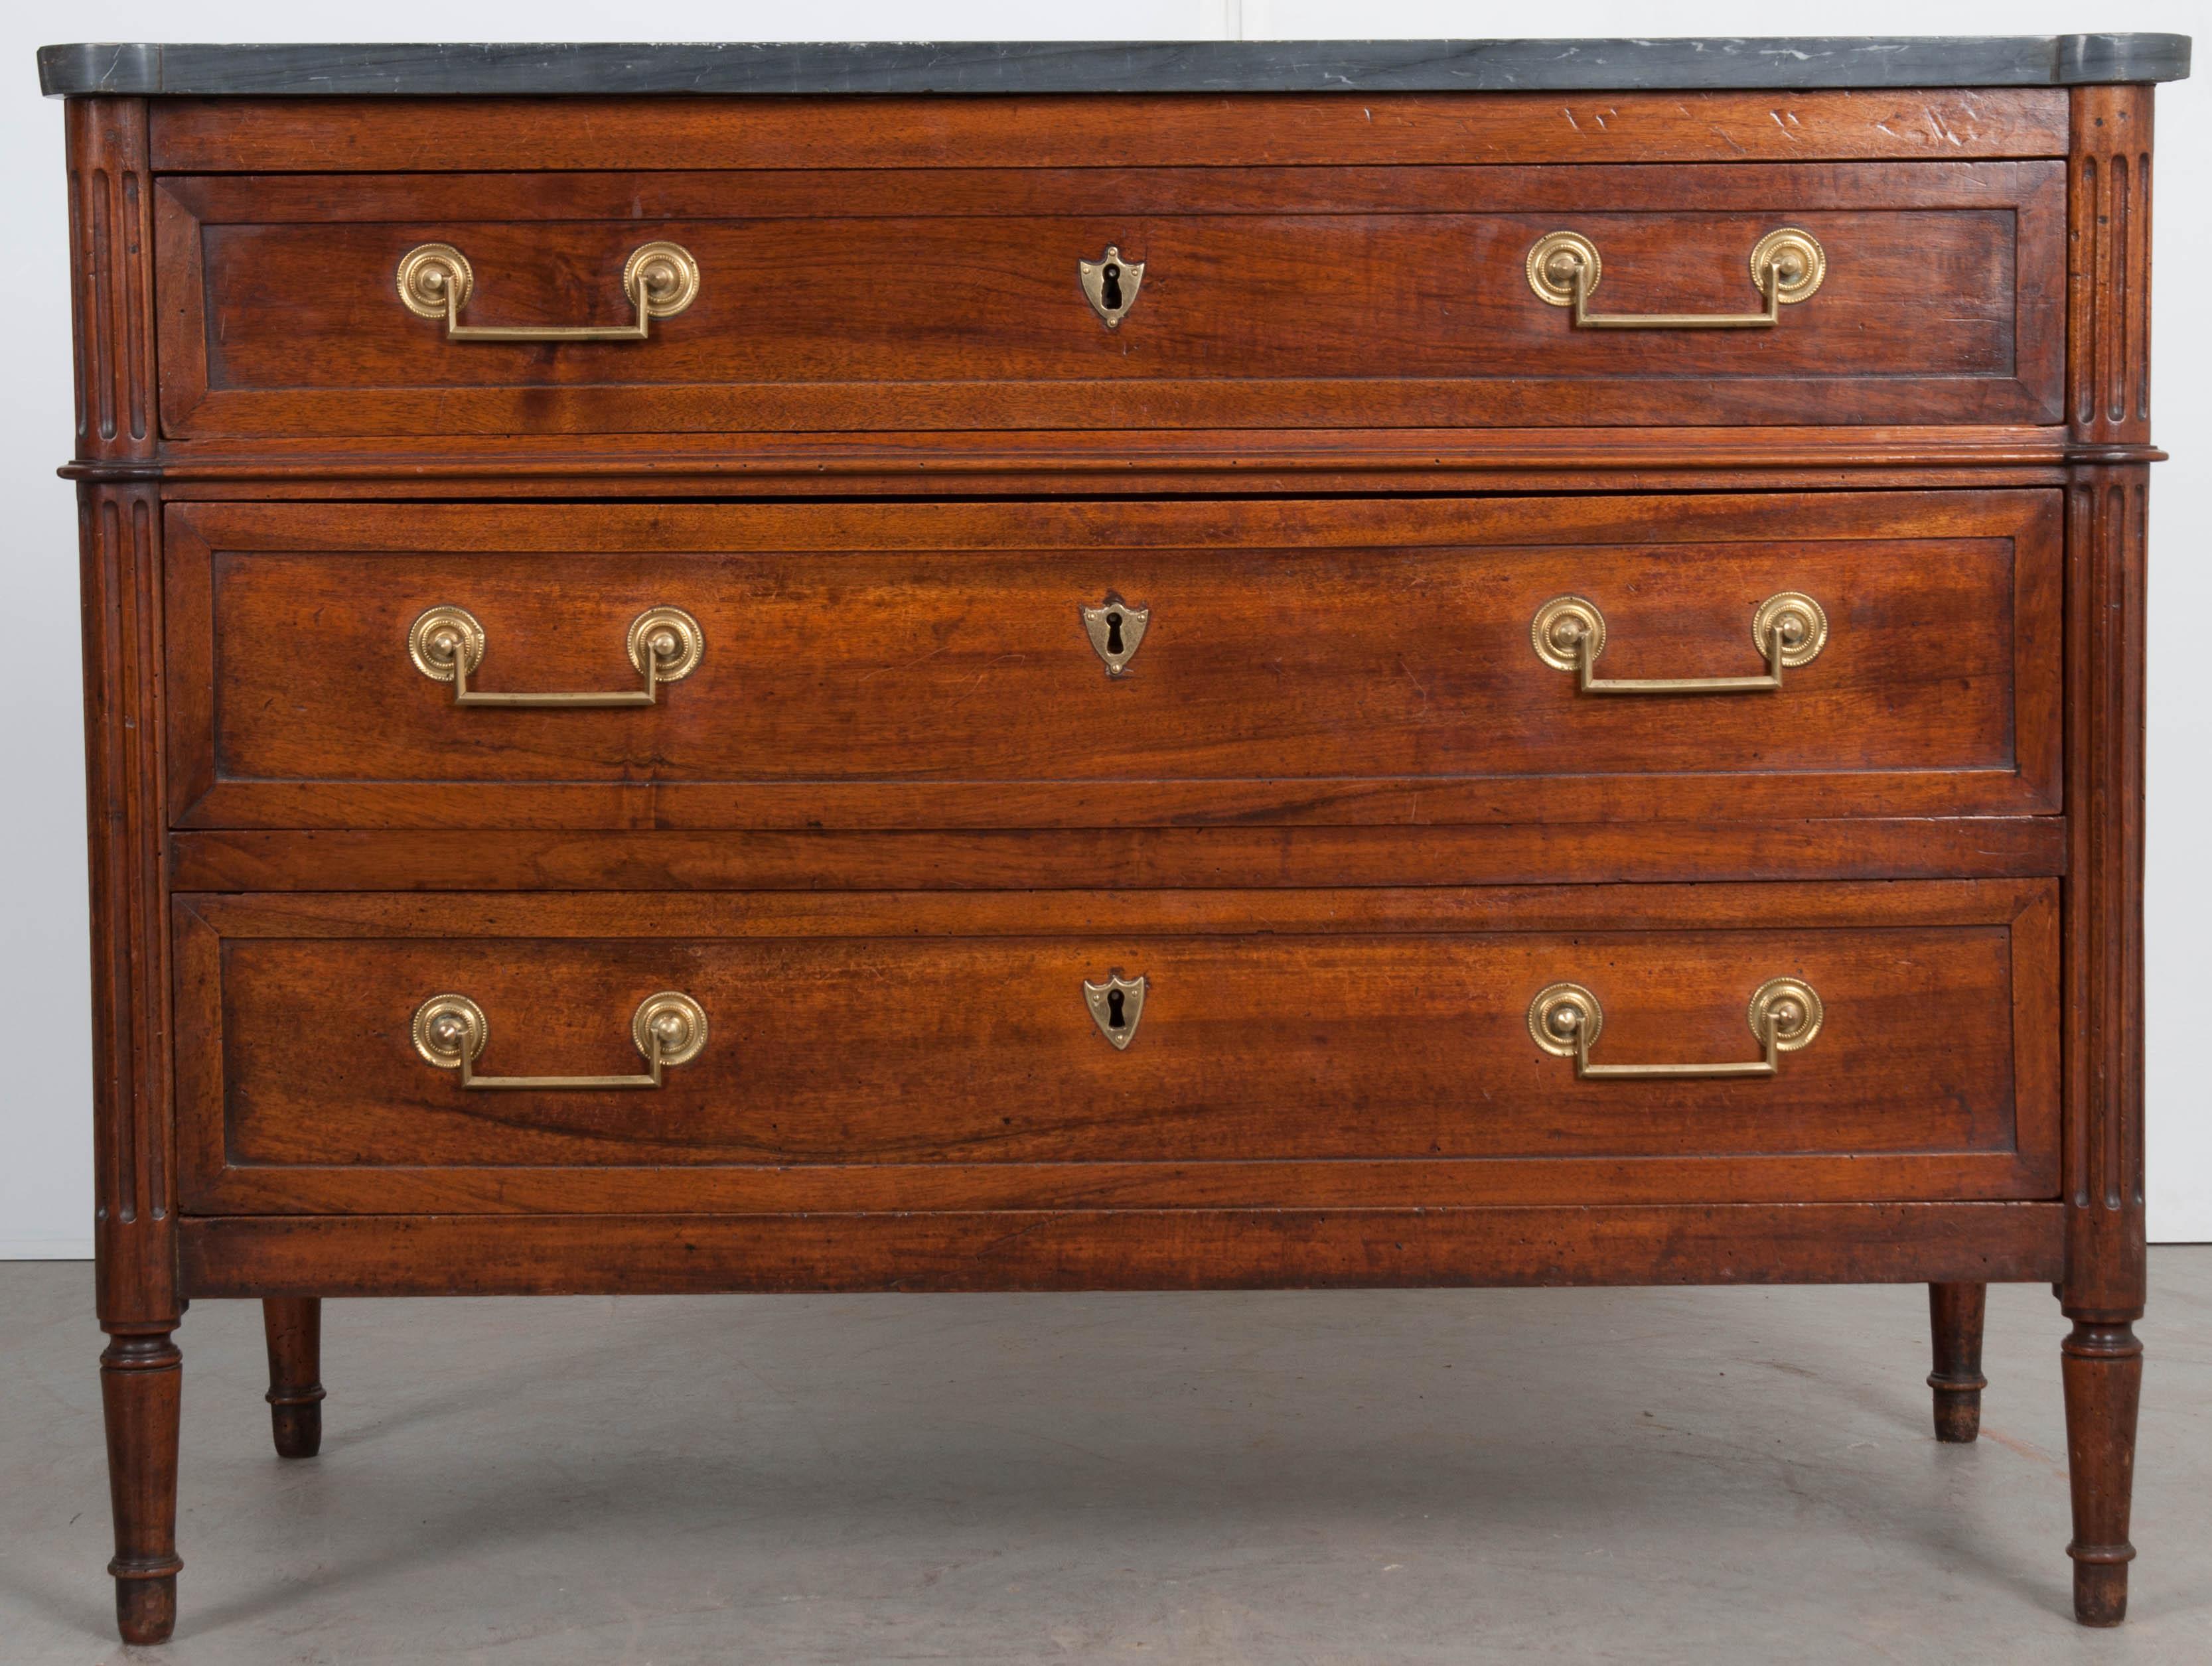 An exceptional French, solid-walnut commode, made in the Louis XVI style, circa 1850. The three-drawer case antique is topped in a wonderful gray marble top, which has been cut to fit the shaped base. It is in good antique condition with a few chips